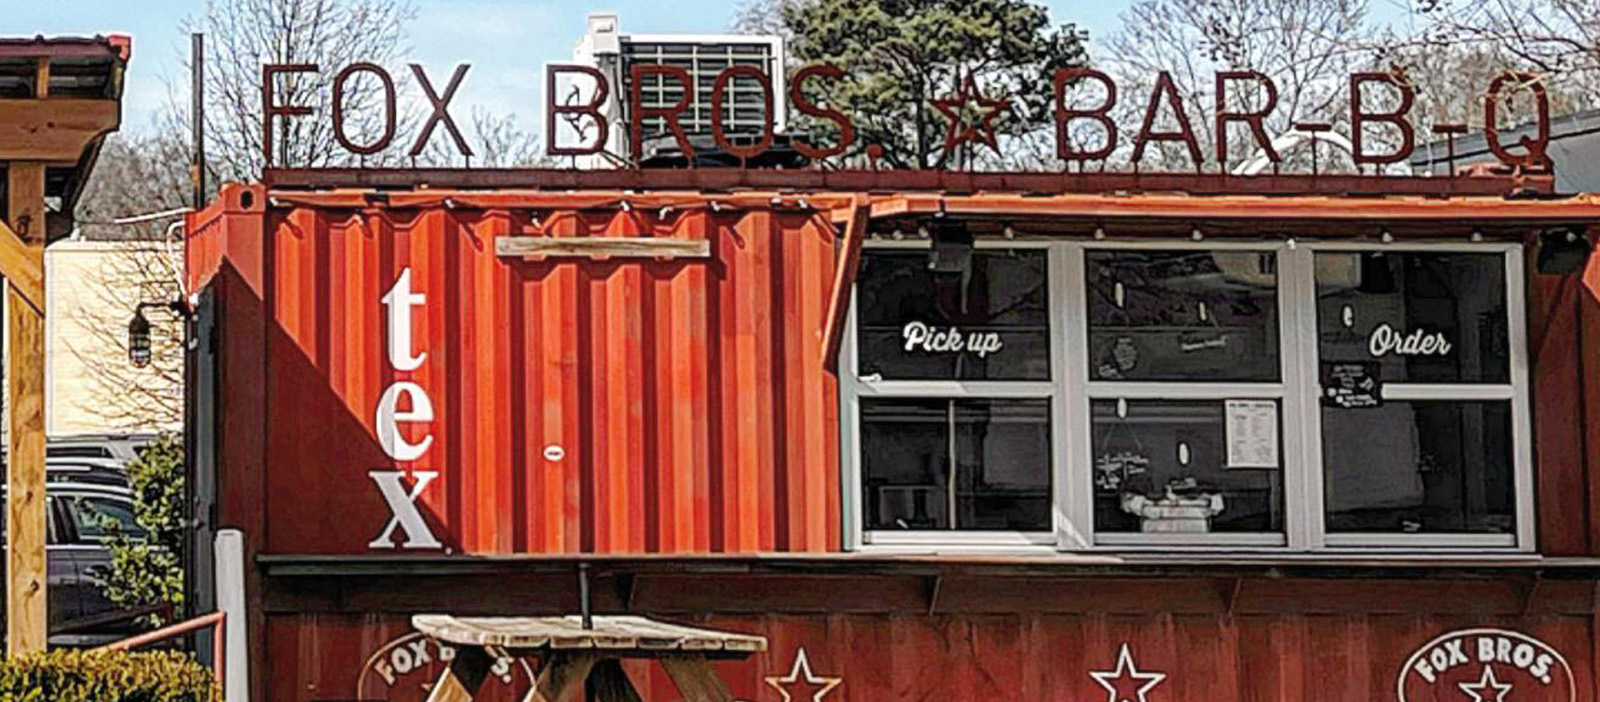 The Best Burger in the U.S. is at Fox Bros. Bar-B-Q